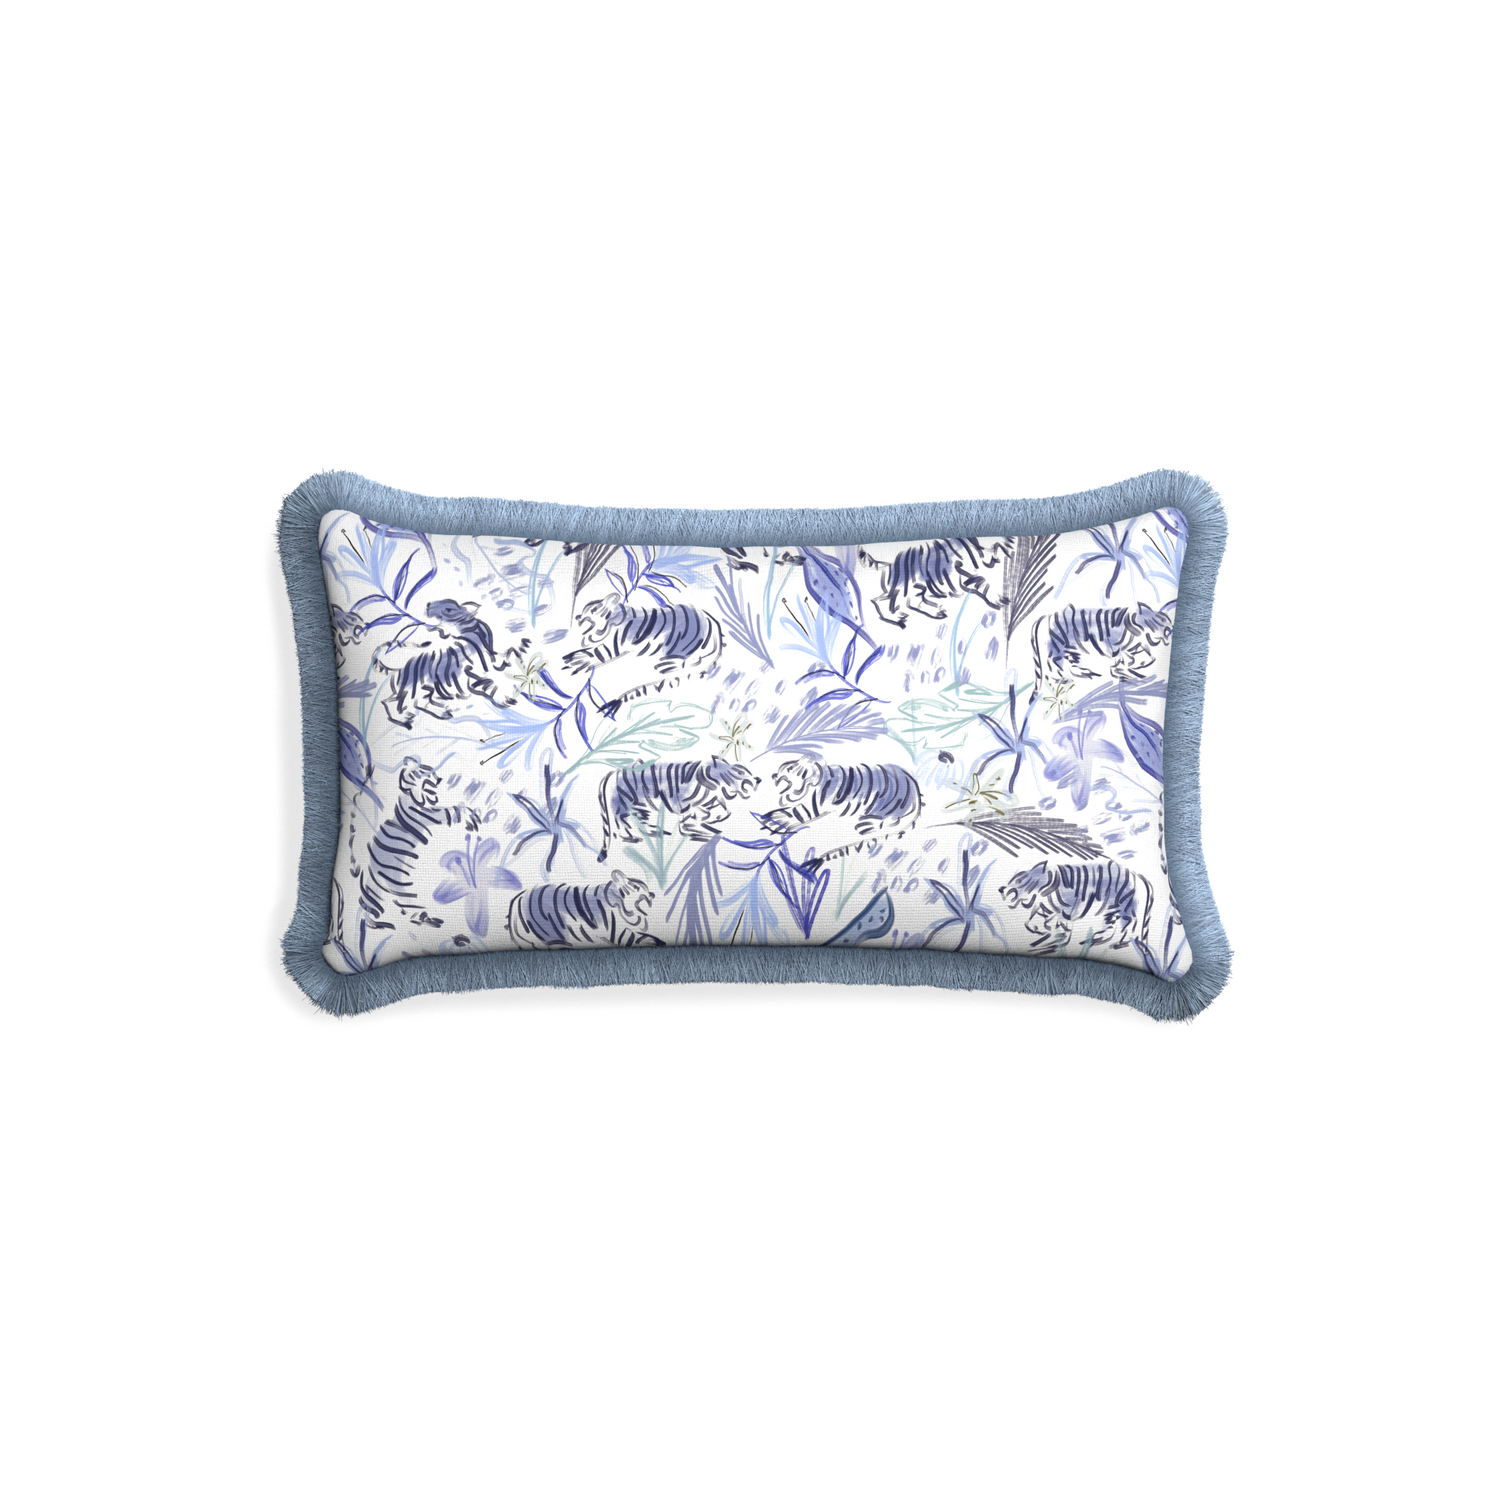 Petite-lumbar frida blue custom blue with intricate tiger designpillow with sky fringe on white background